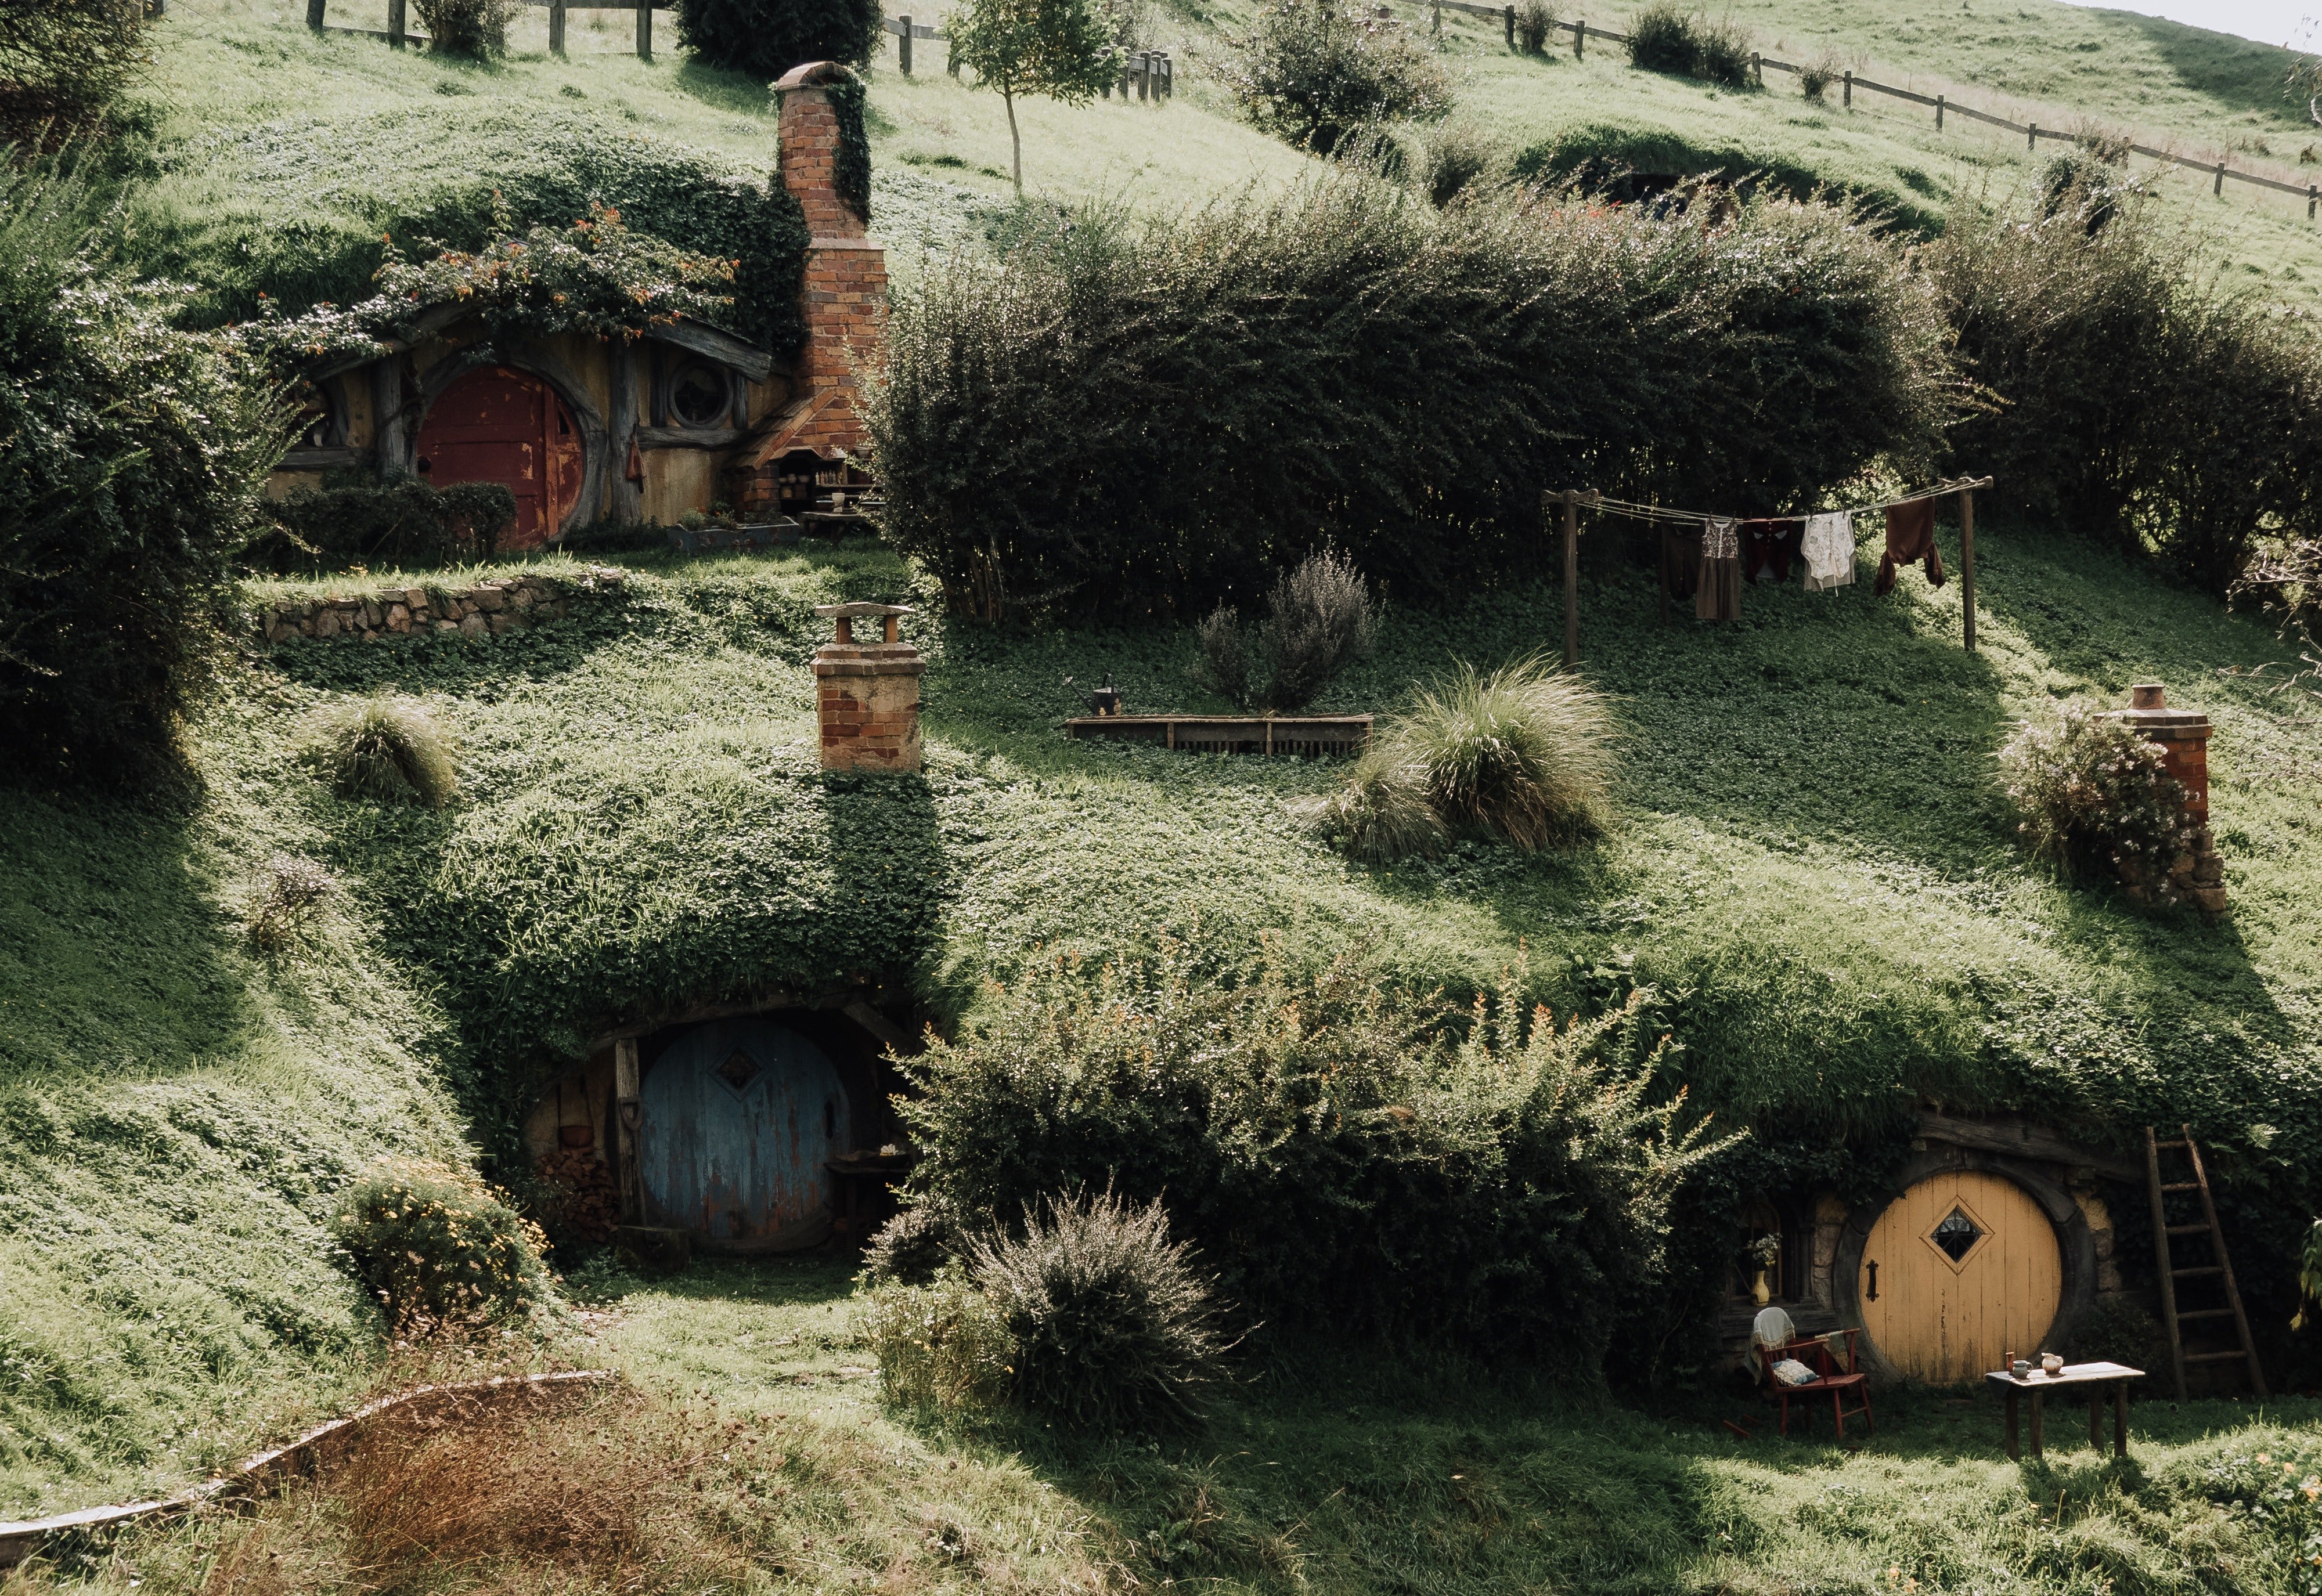 Hobbit 4K wallpapers for your desktop or mobile screen and 4000x2750